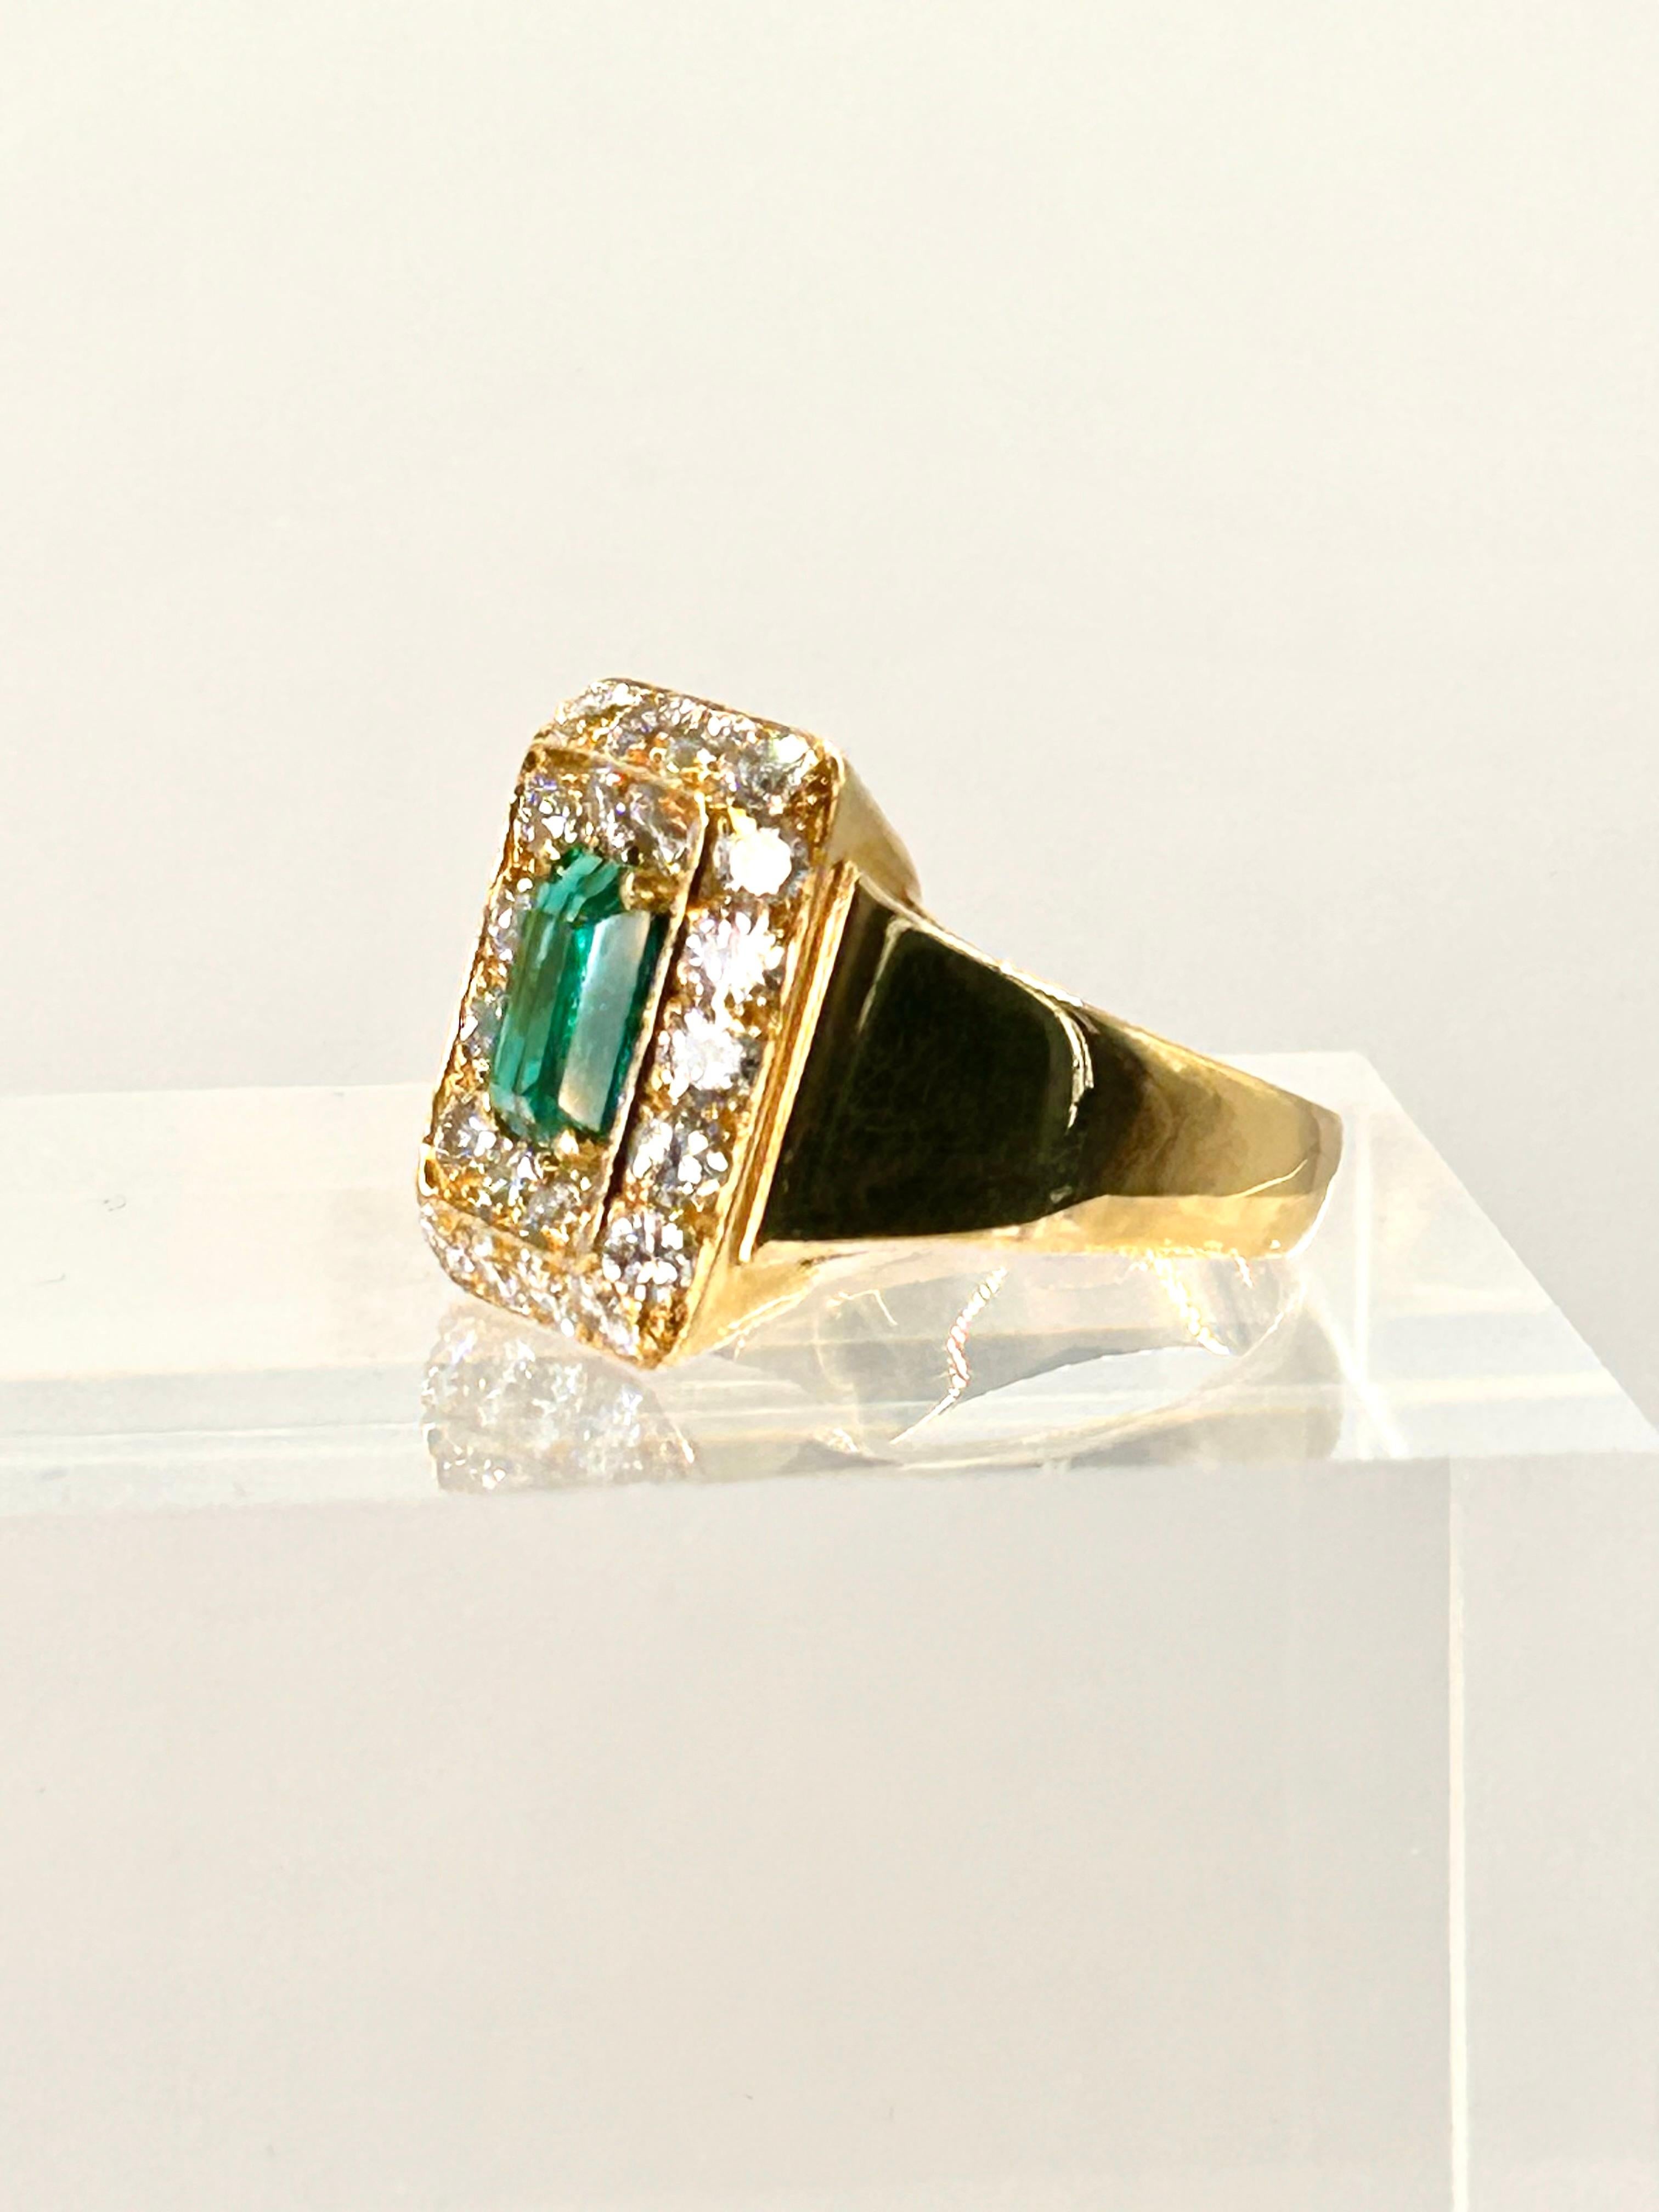 18 Karat Yellow Gold Ring set with an Emerald cut 2.01 Carat Emerald, certified by AGL as Colombian Origin with Minor Traditional Treatment.  The Vivid Green Emerald is surrounded by Round Brilliant Cut Diamonds of 2.50 Carat Total Weight, average